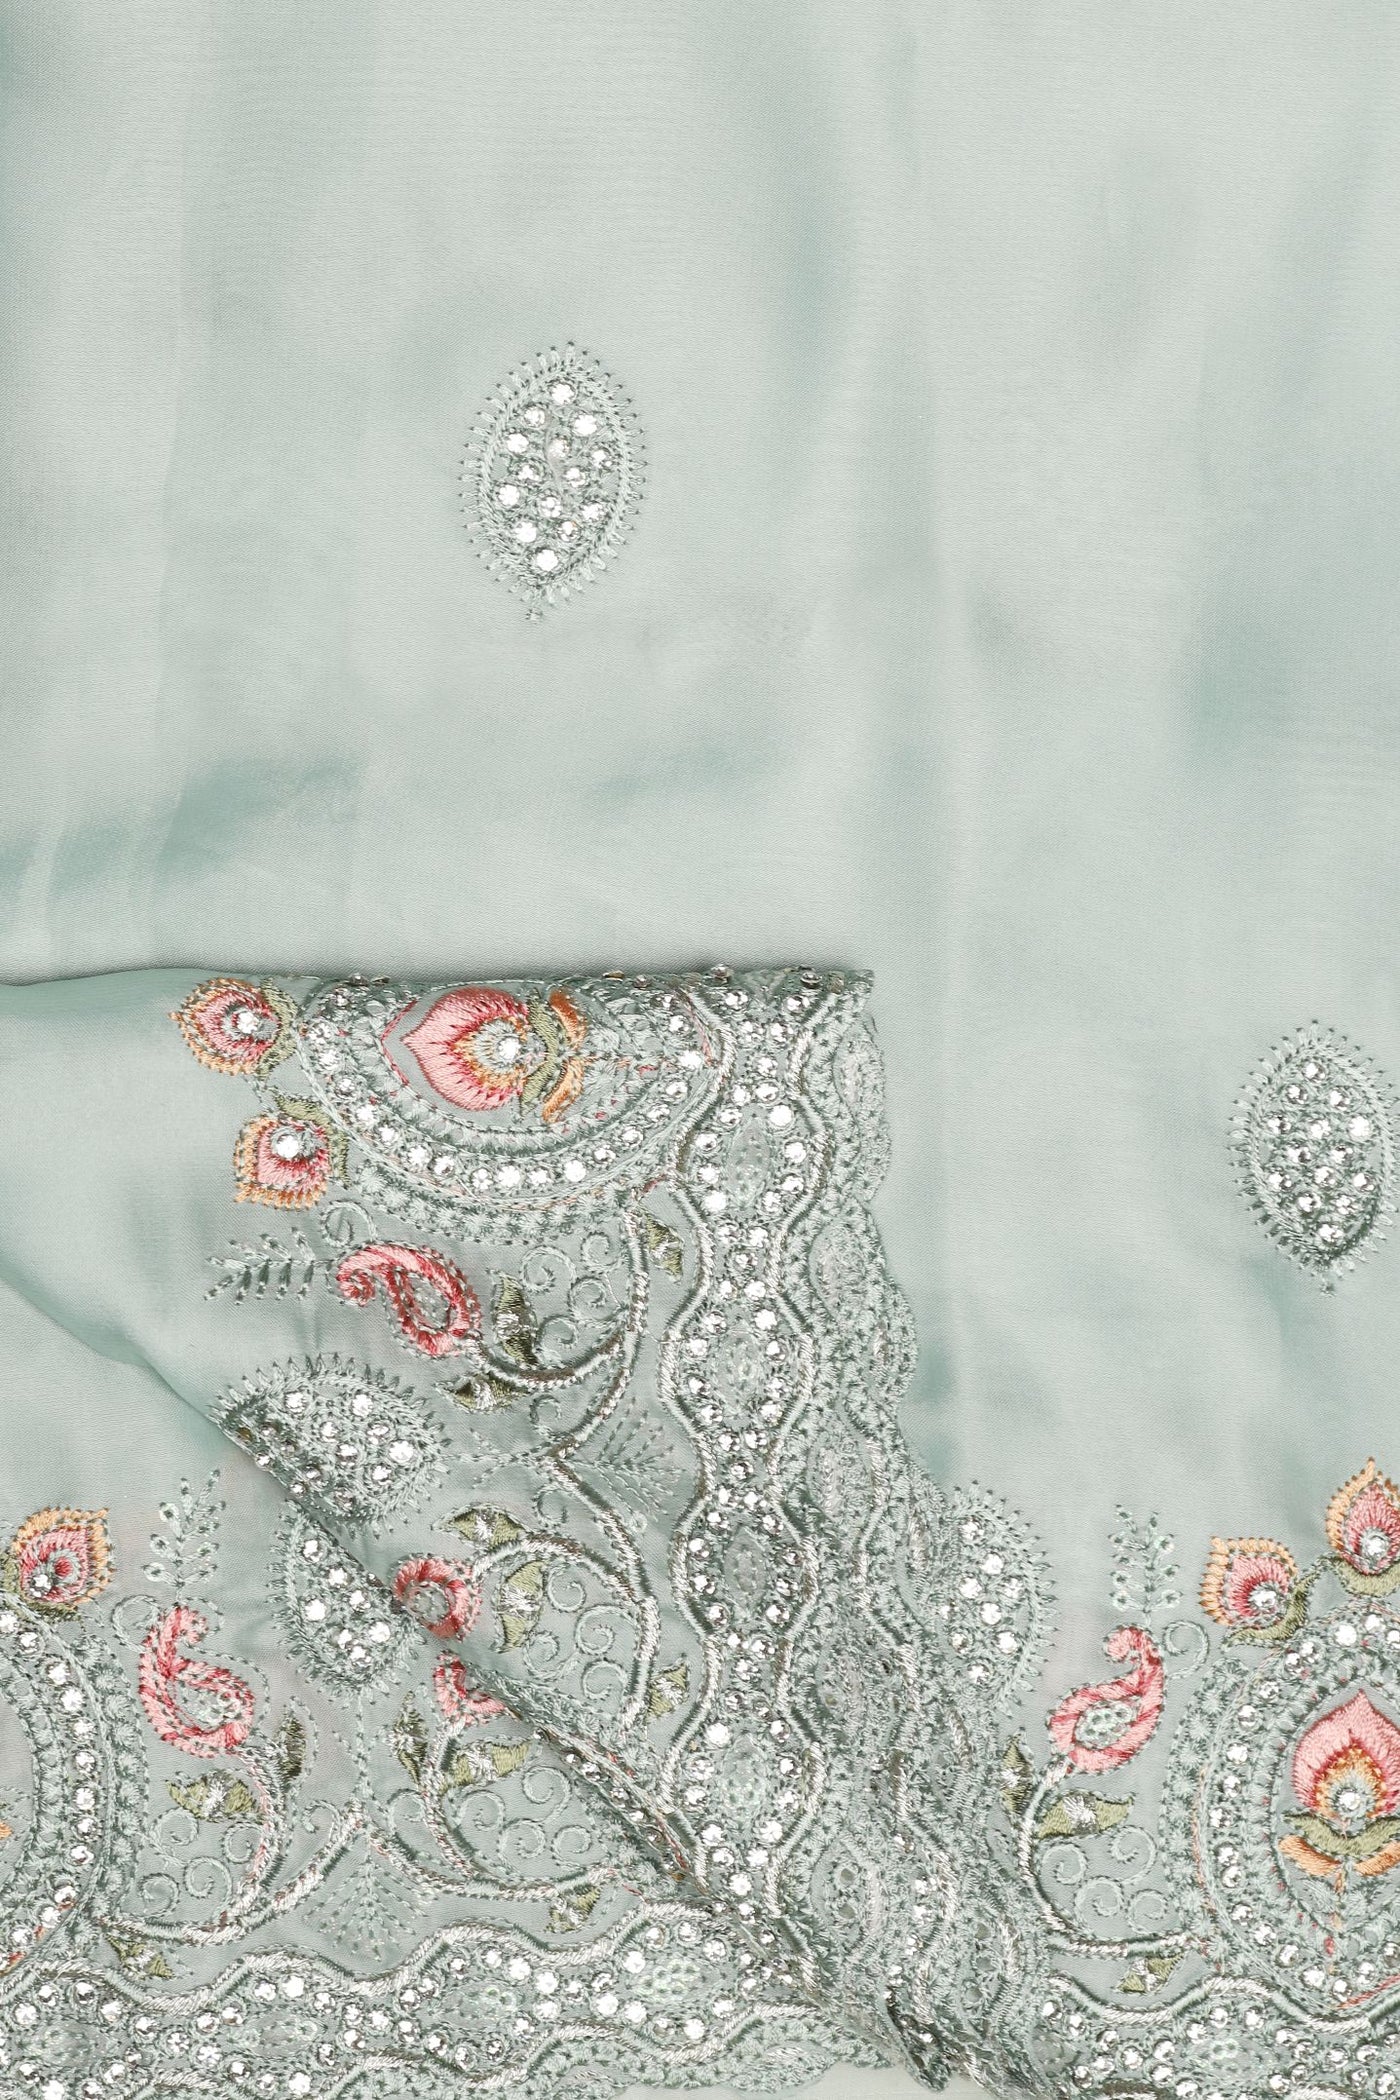 Enchanting Aqua Silk Saree with Sparkling Sequins and Intricate Thread Work